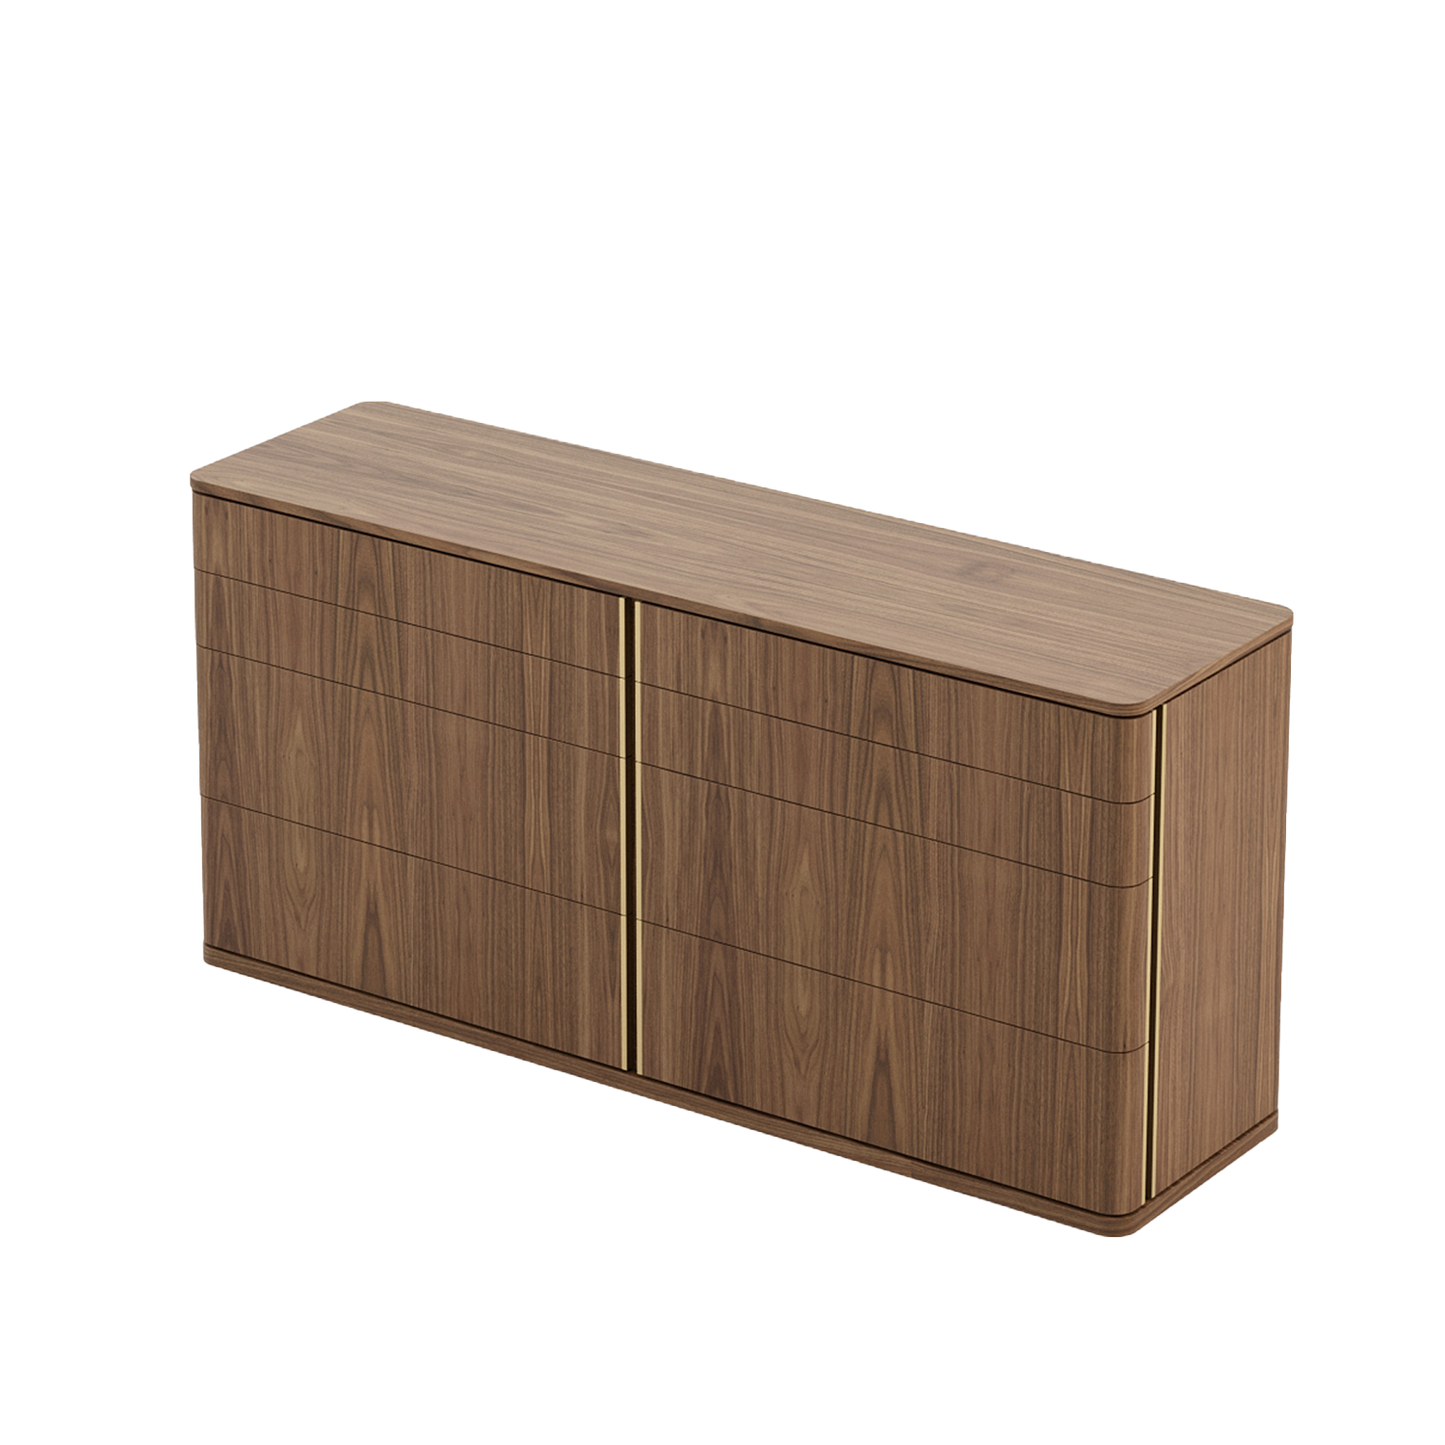 Hilary Chest of Drawers | Laskasas | Dressers and chests | hilary-chest-of-drawers